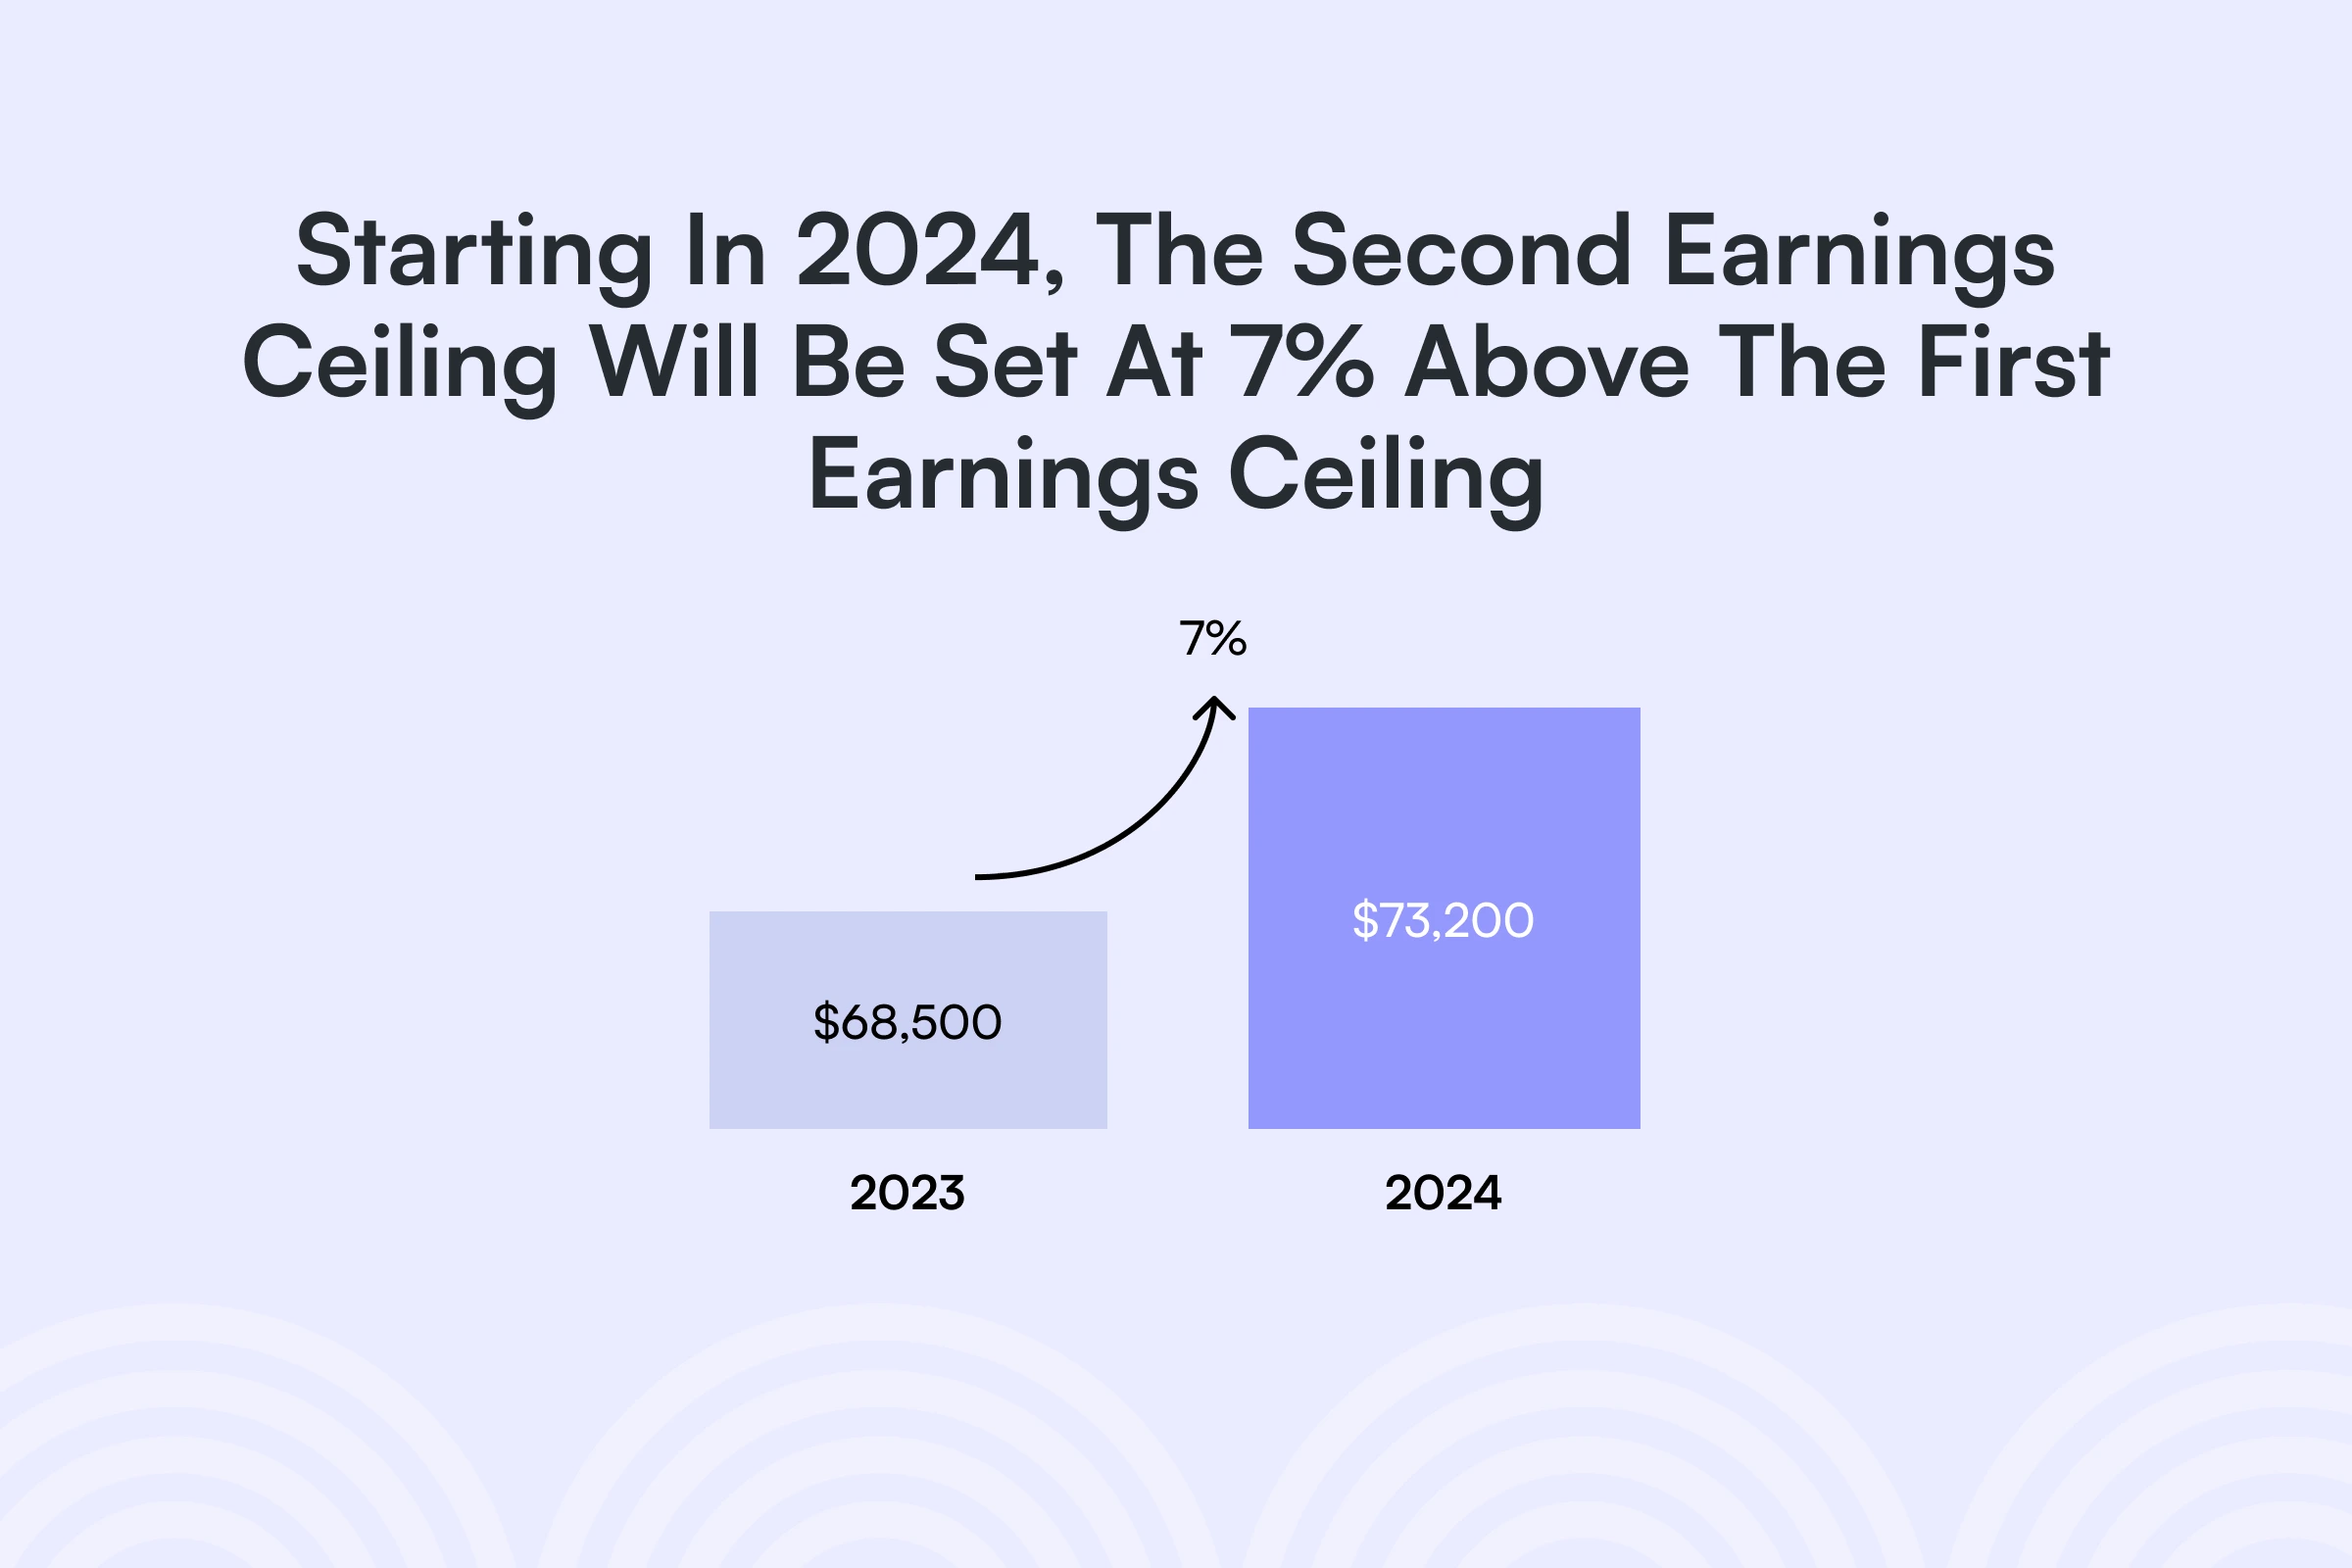 Starting in 2024, the second earnings ceiling will be set at 7% above the first earnings ceiling